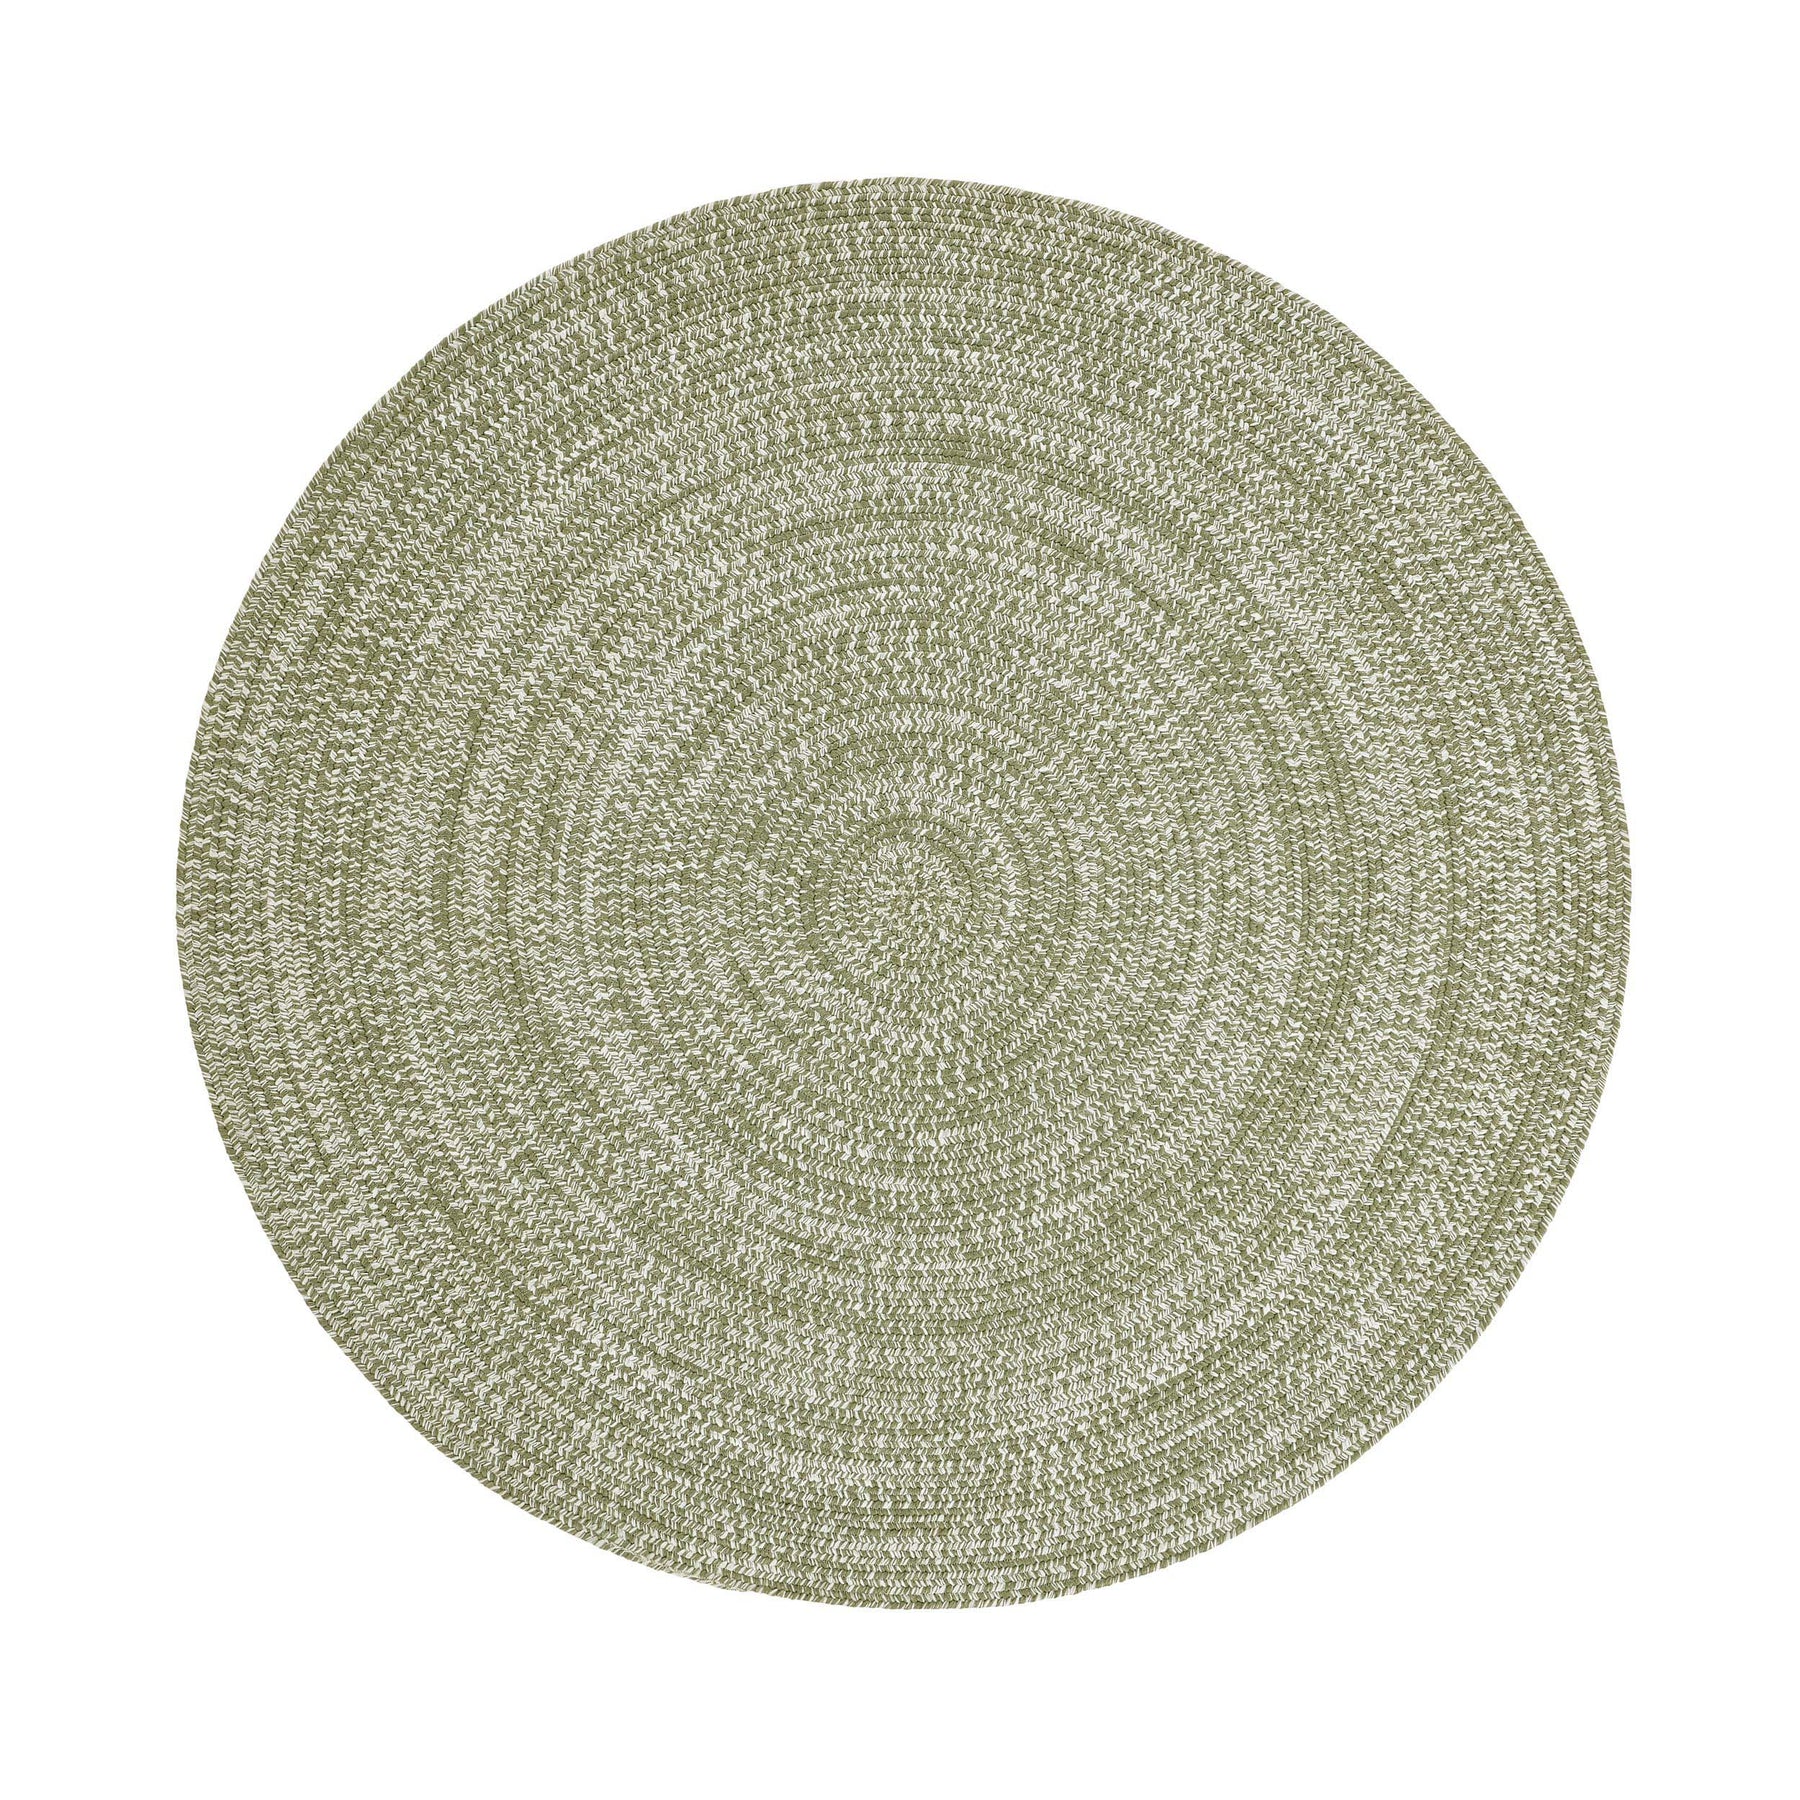 Superior Soft Reversible Braided Eco-Friendly Area Rug Indoor Outdoor